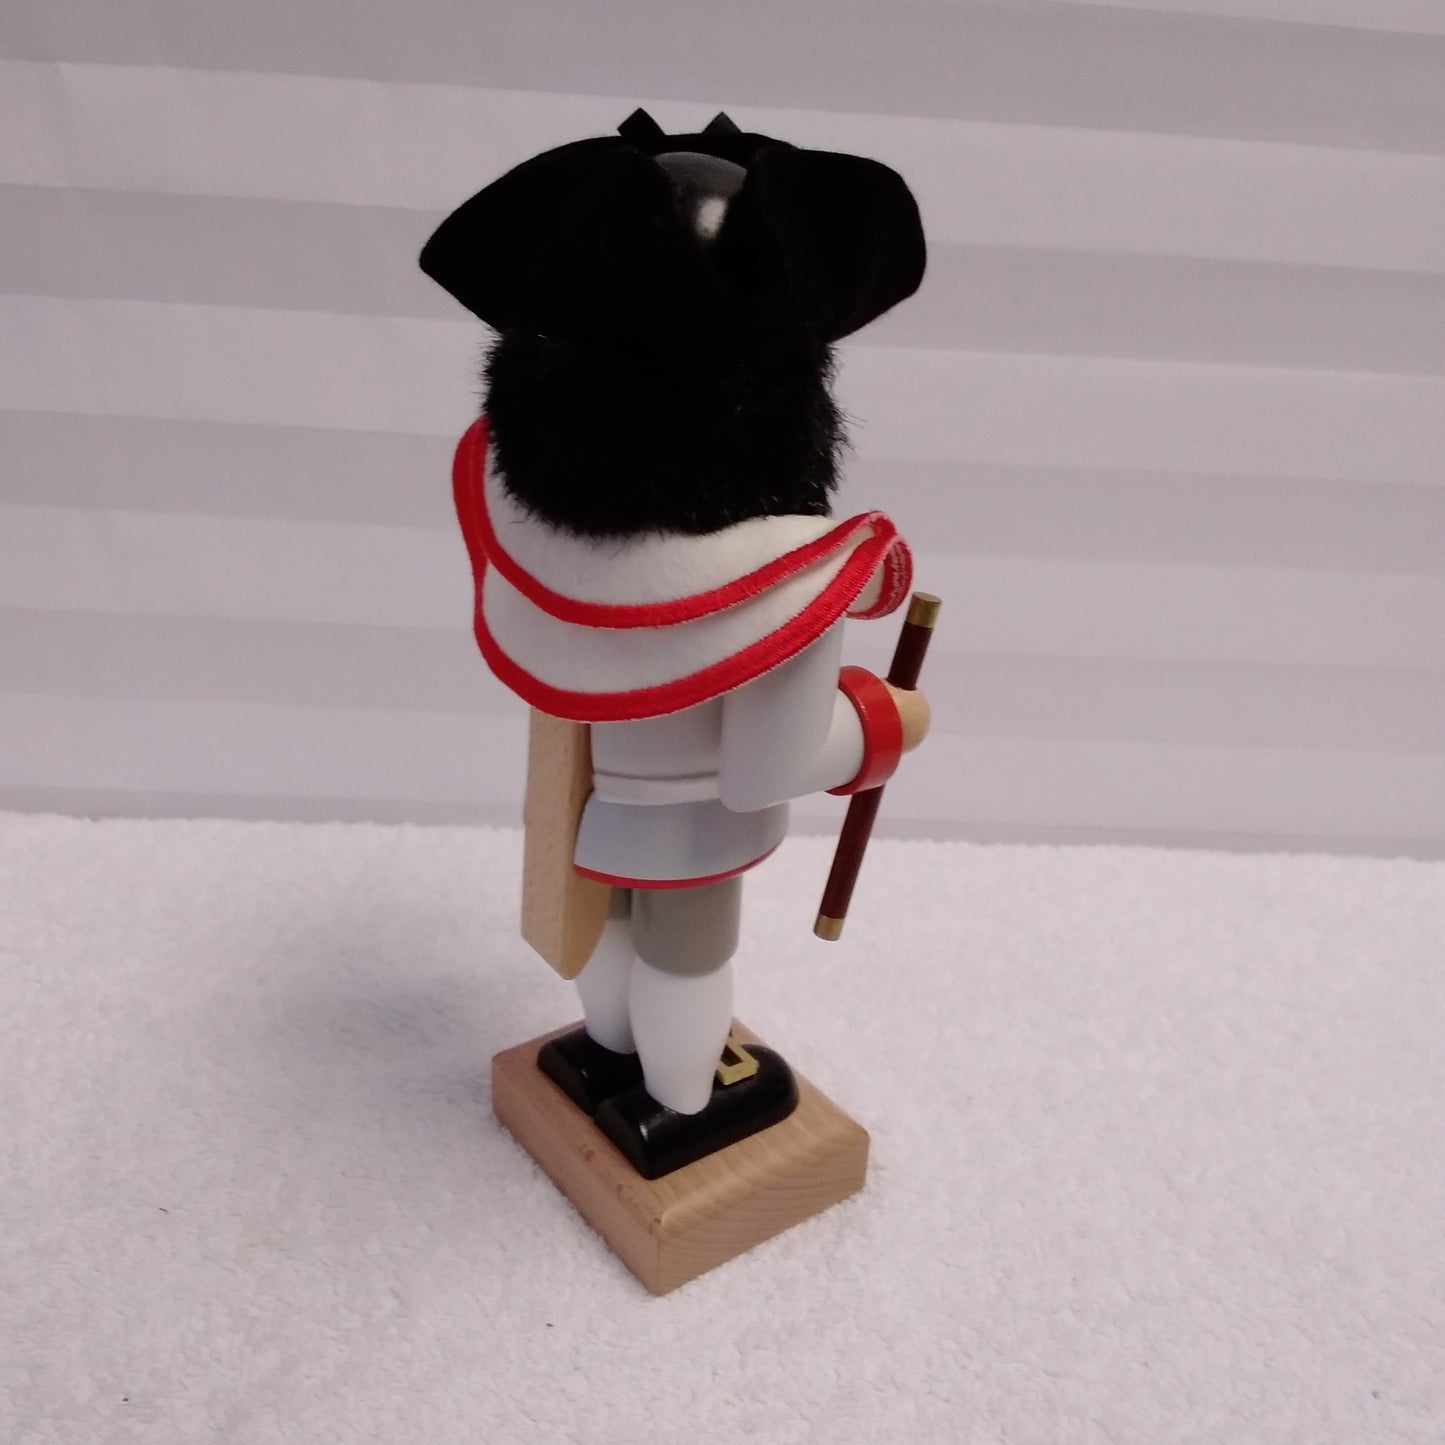 RARE - Signed Christian Ulbricht Nutcracker Wearing a White Jacket with Red Trim Holding a Flute